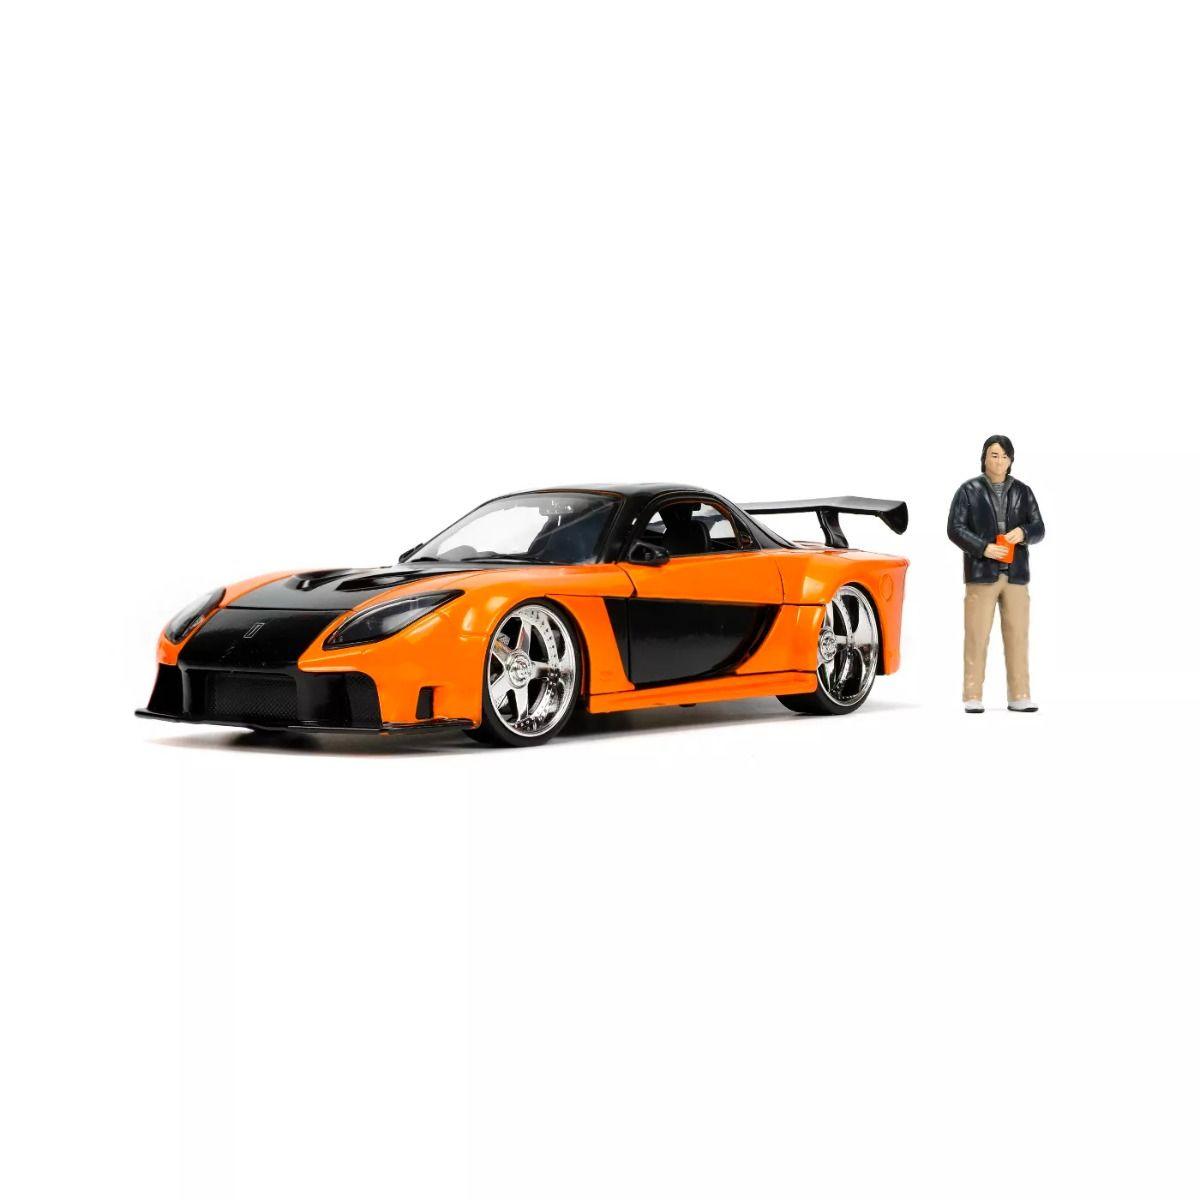 JAD33174 Fast and Furious - 1997 Mazda RX7 with Han 1:24 Scale Hollywood Ride - Jada Toys - Titan Pop Culture